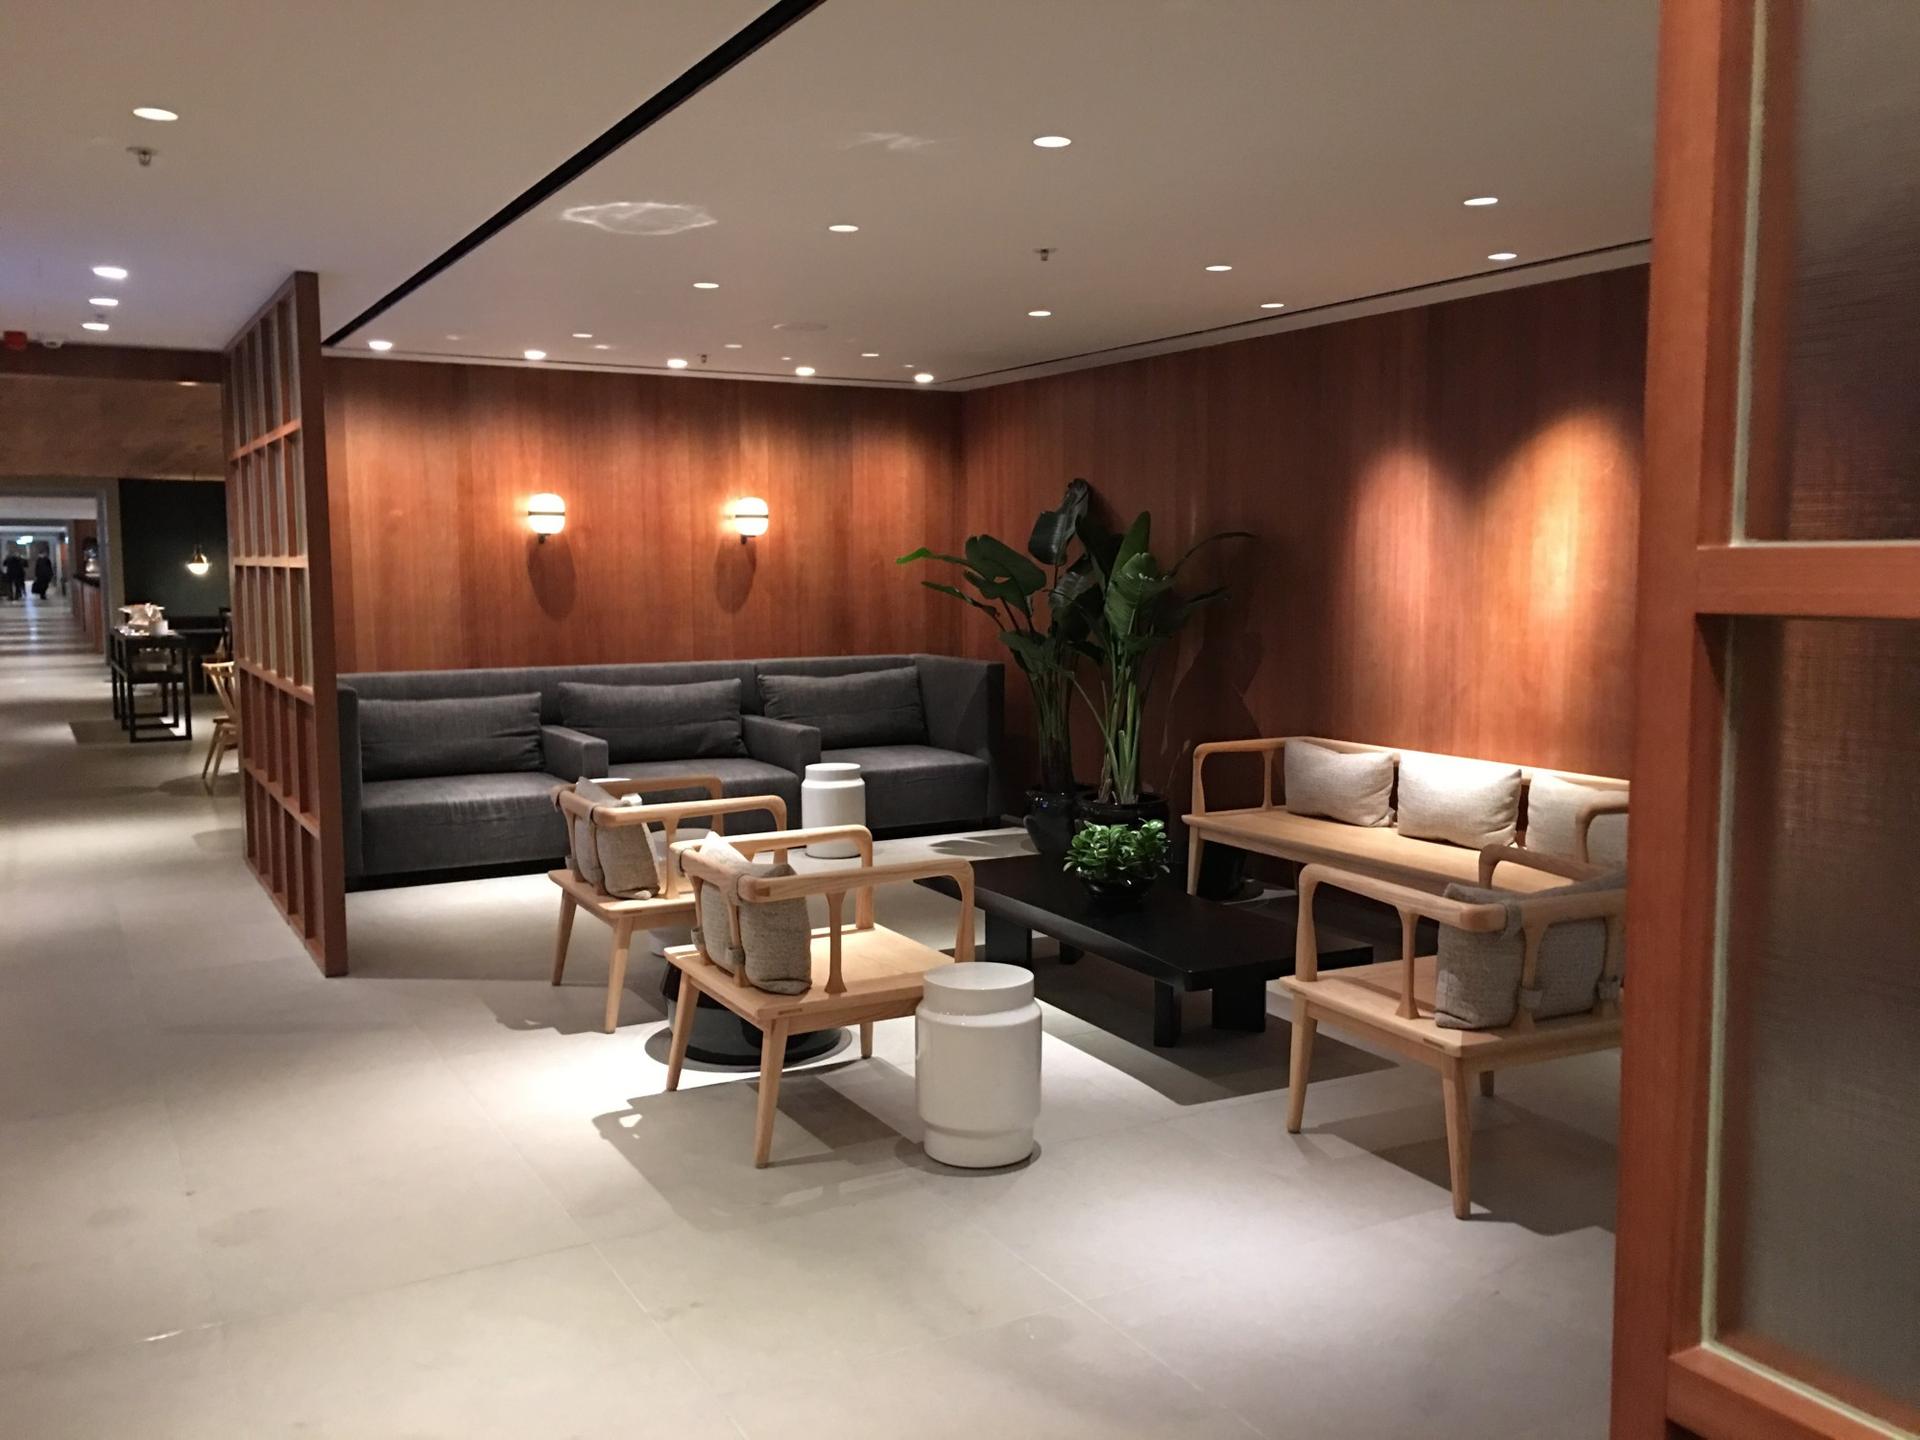 Cathay Pacific The Pier Business Class Lounge image 28 of 61